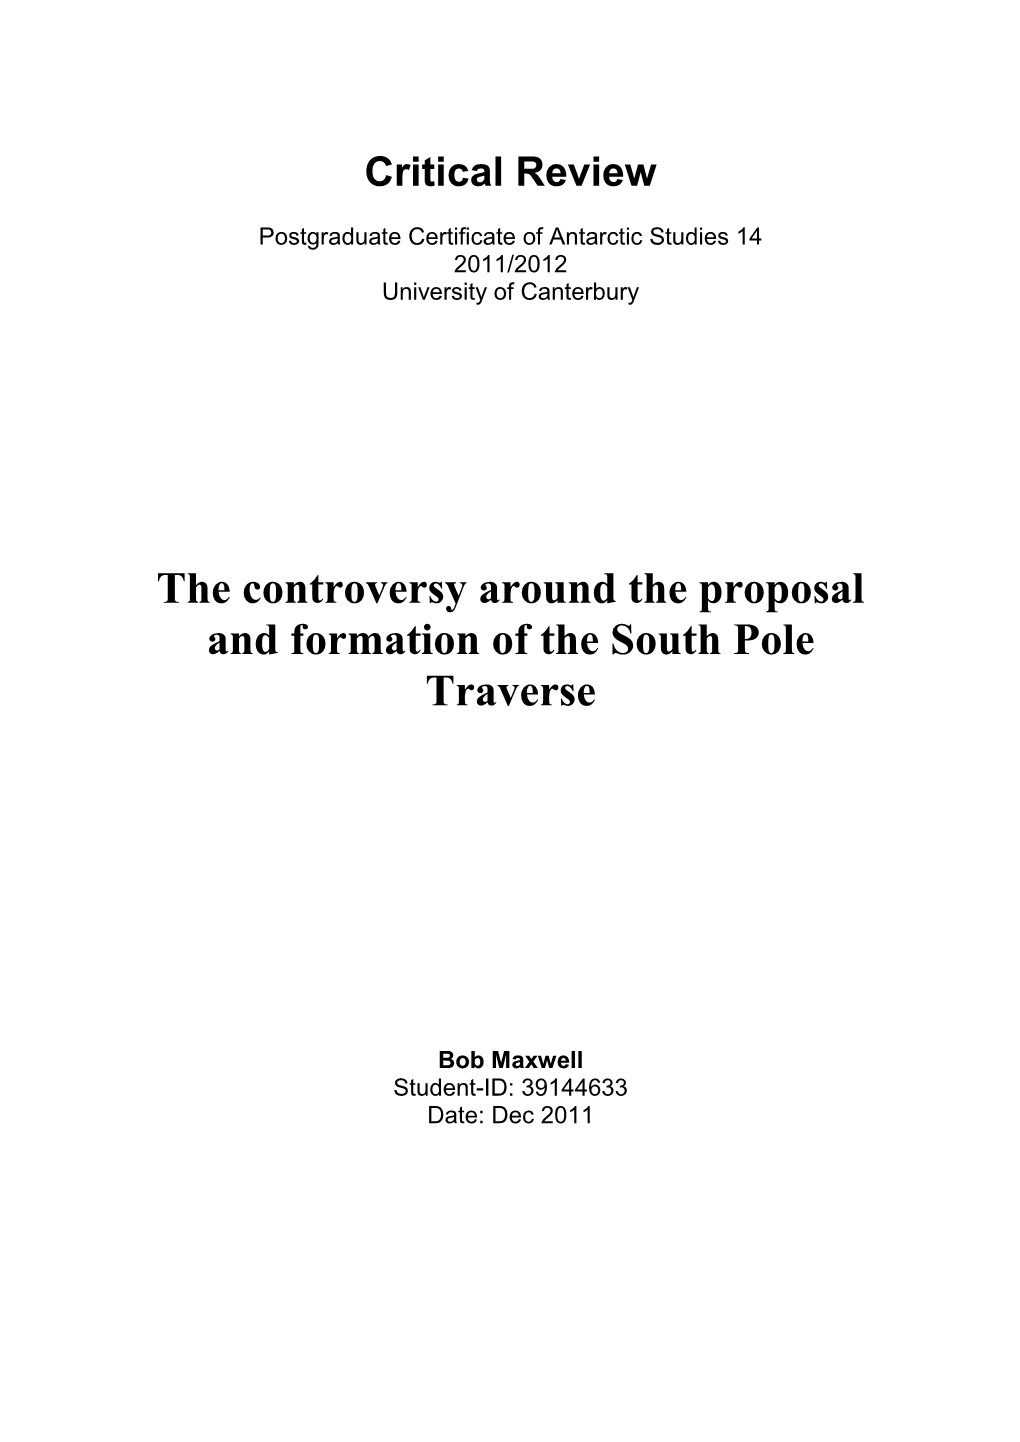 The Controversy Around the Proposal and Formation of the South Pole Traverse